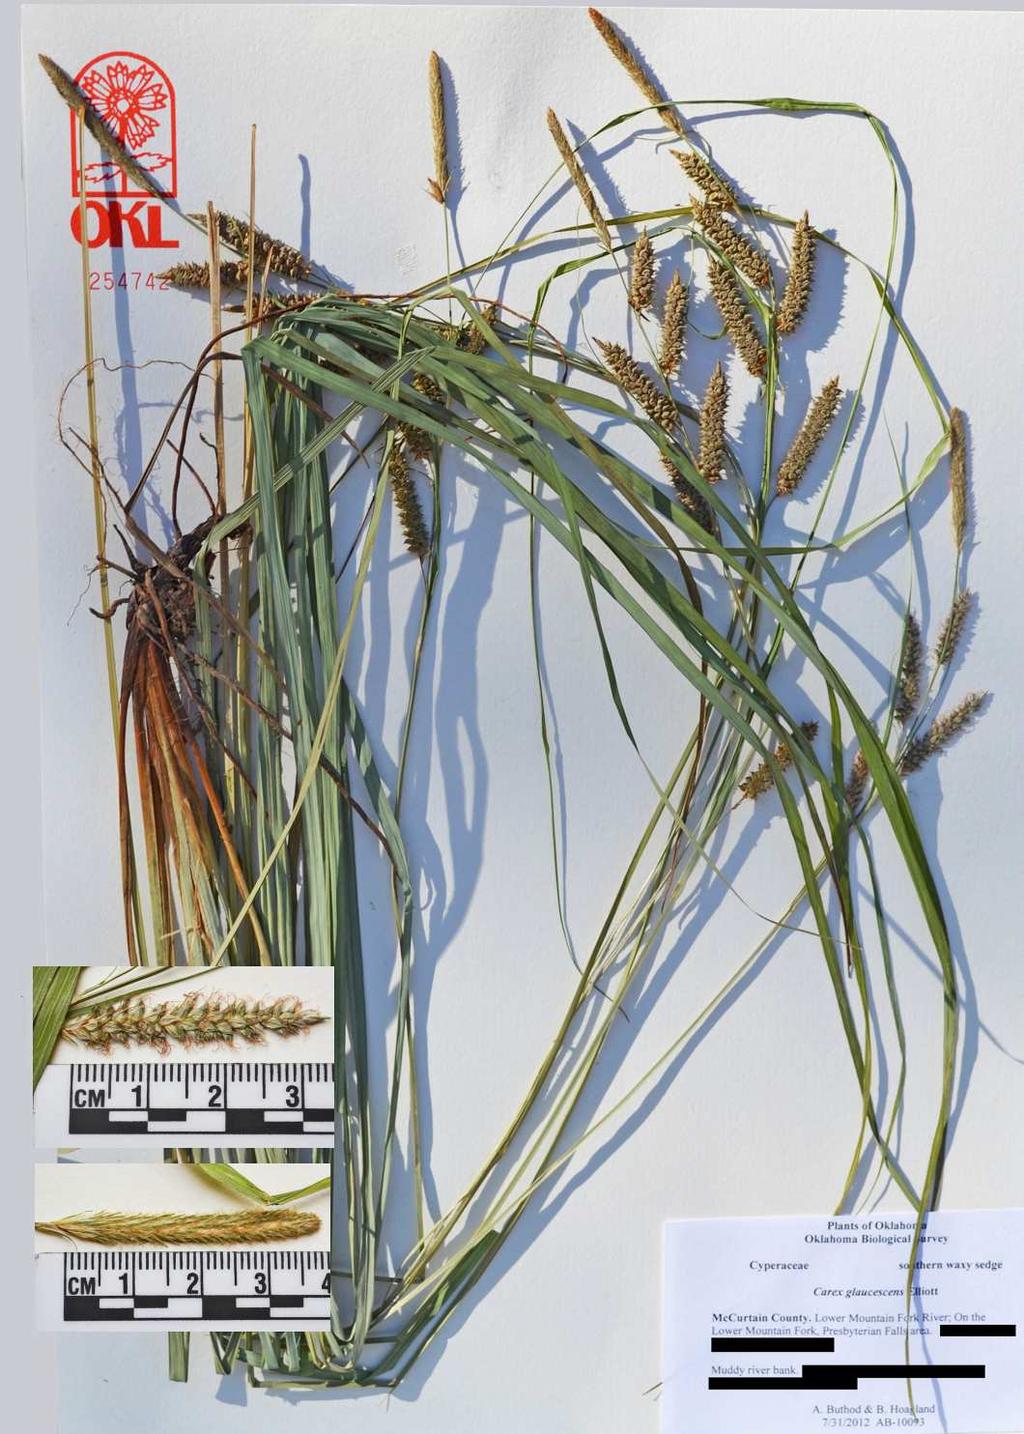 Figure 2. Carex glaucescens. Photo by Amy Buthod.